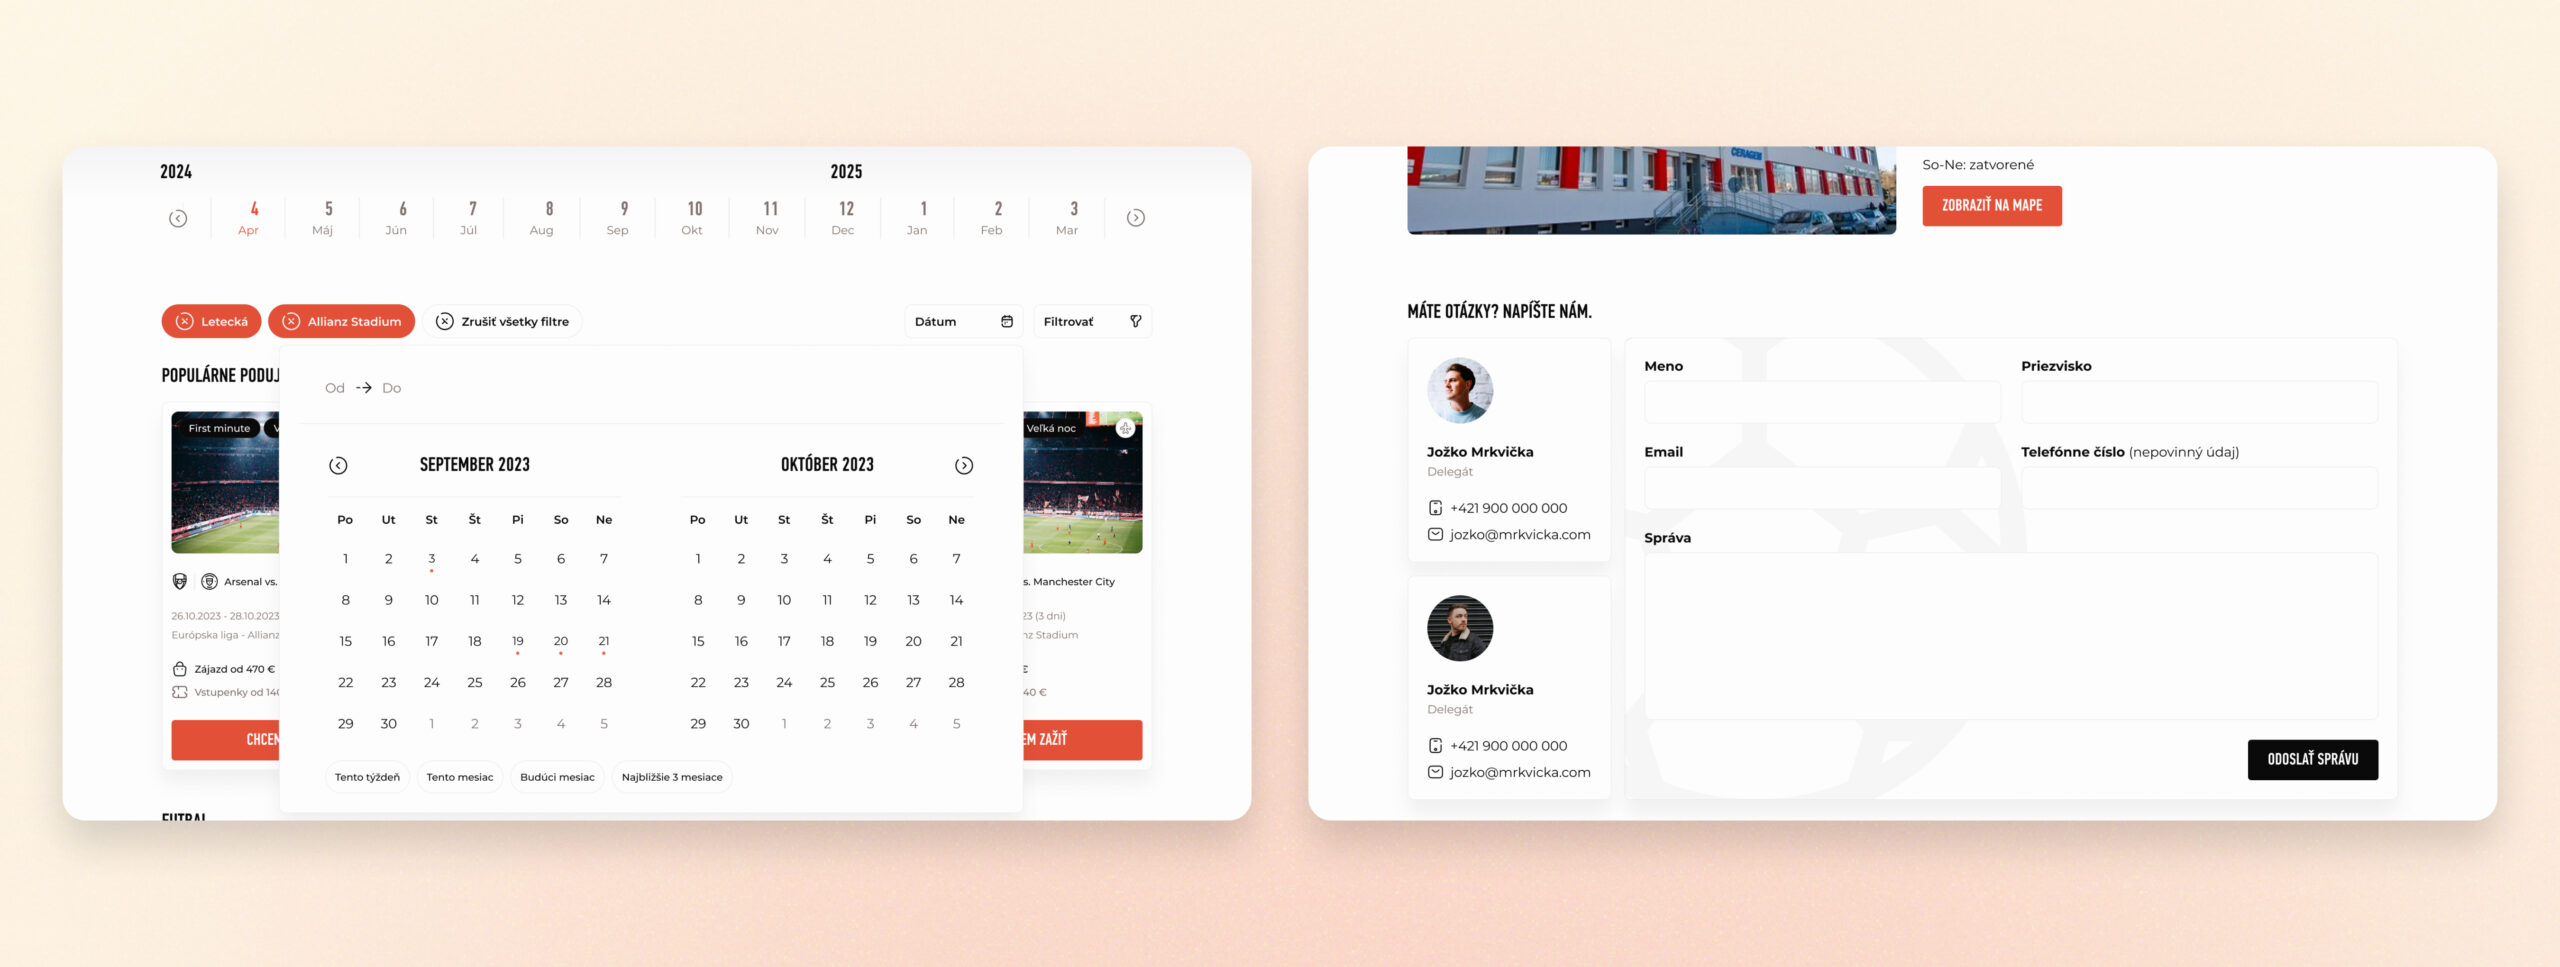 My Design of Calendar and Contact Page